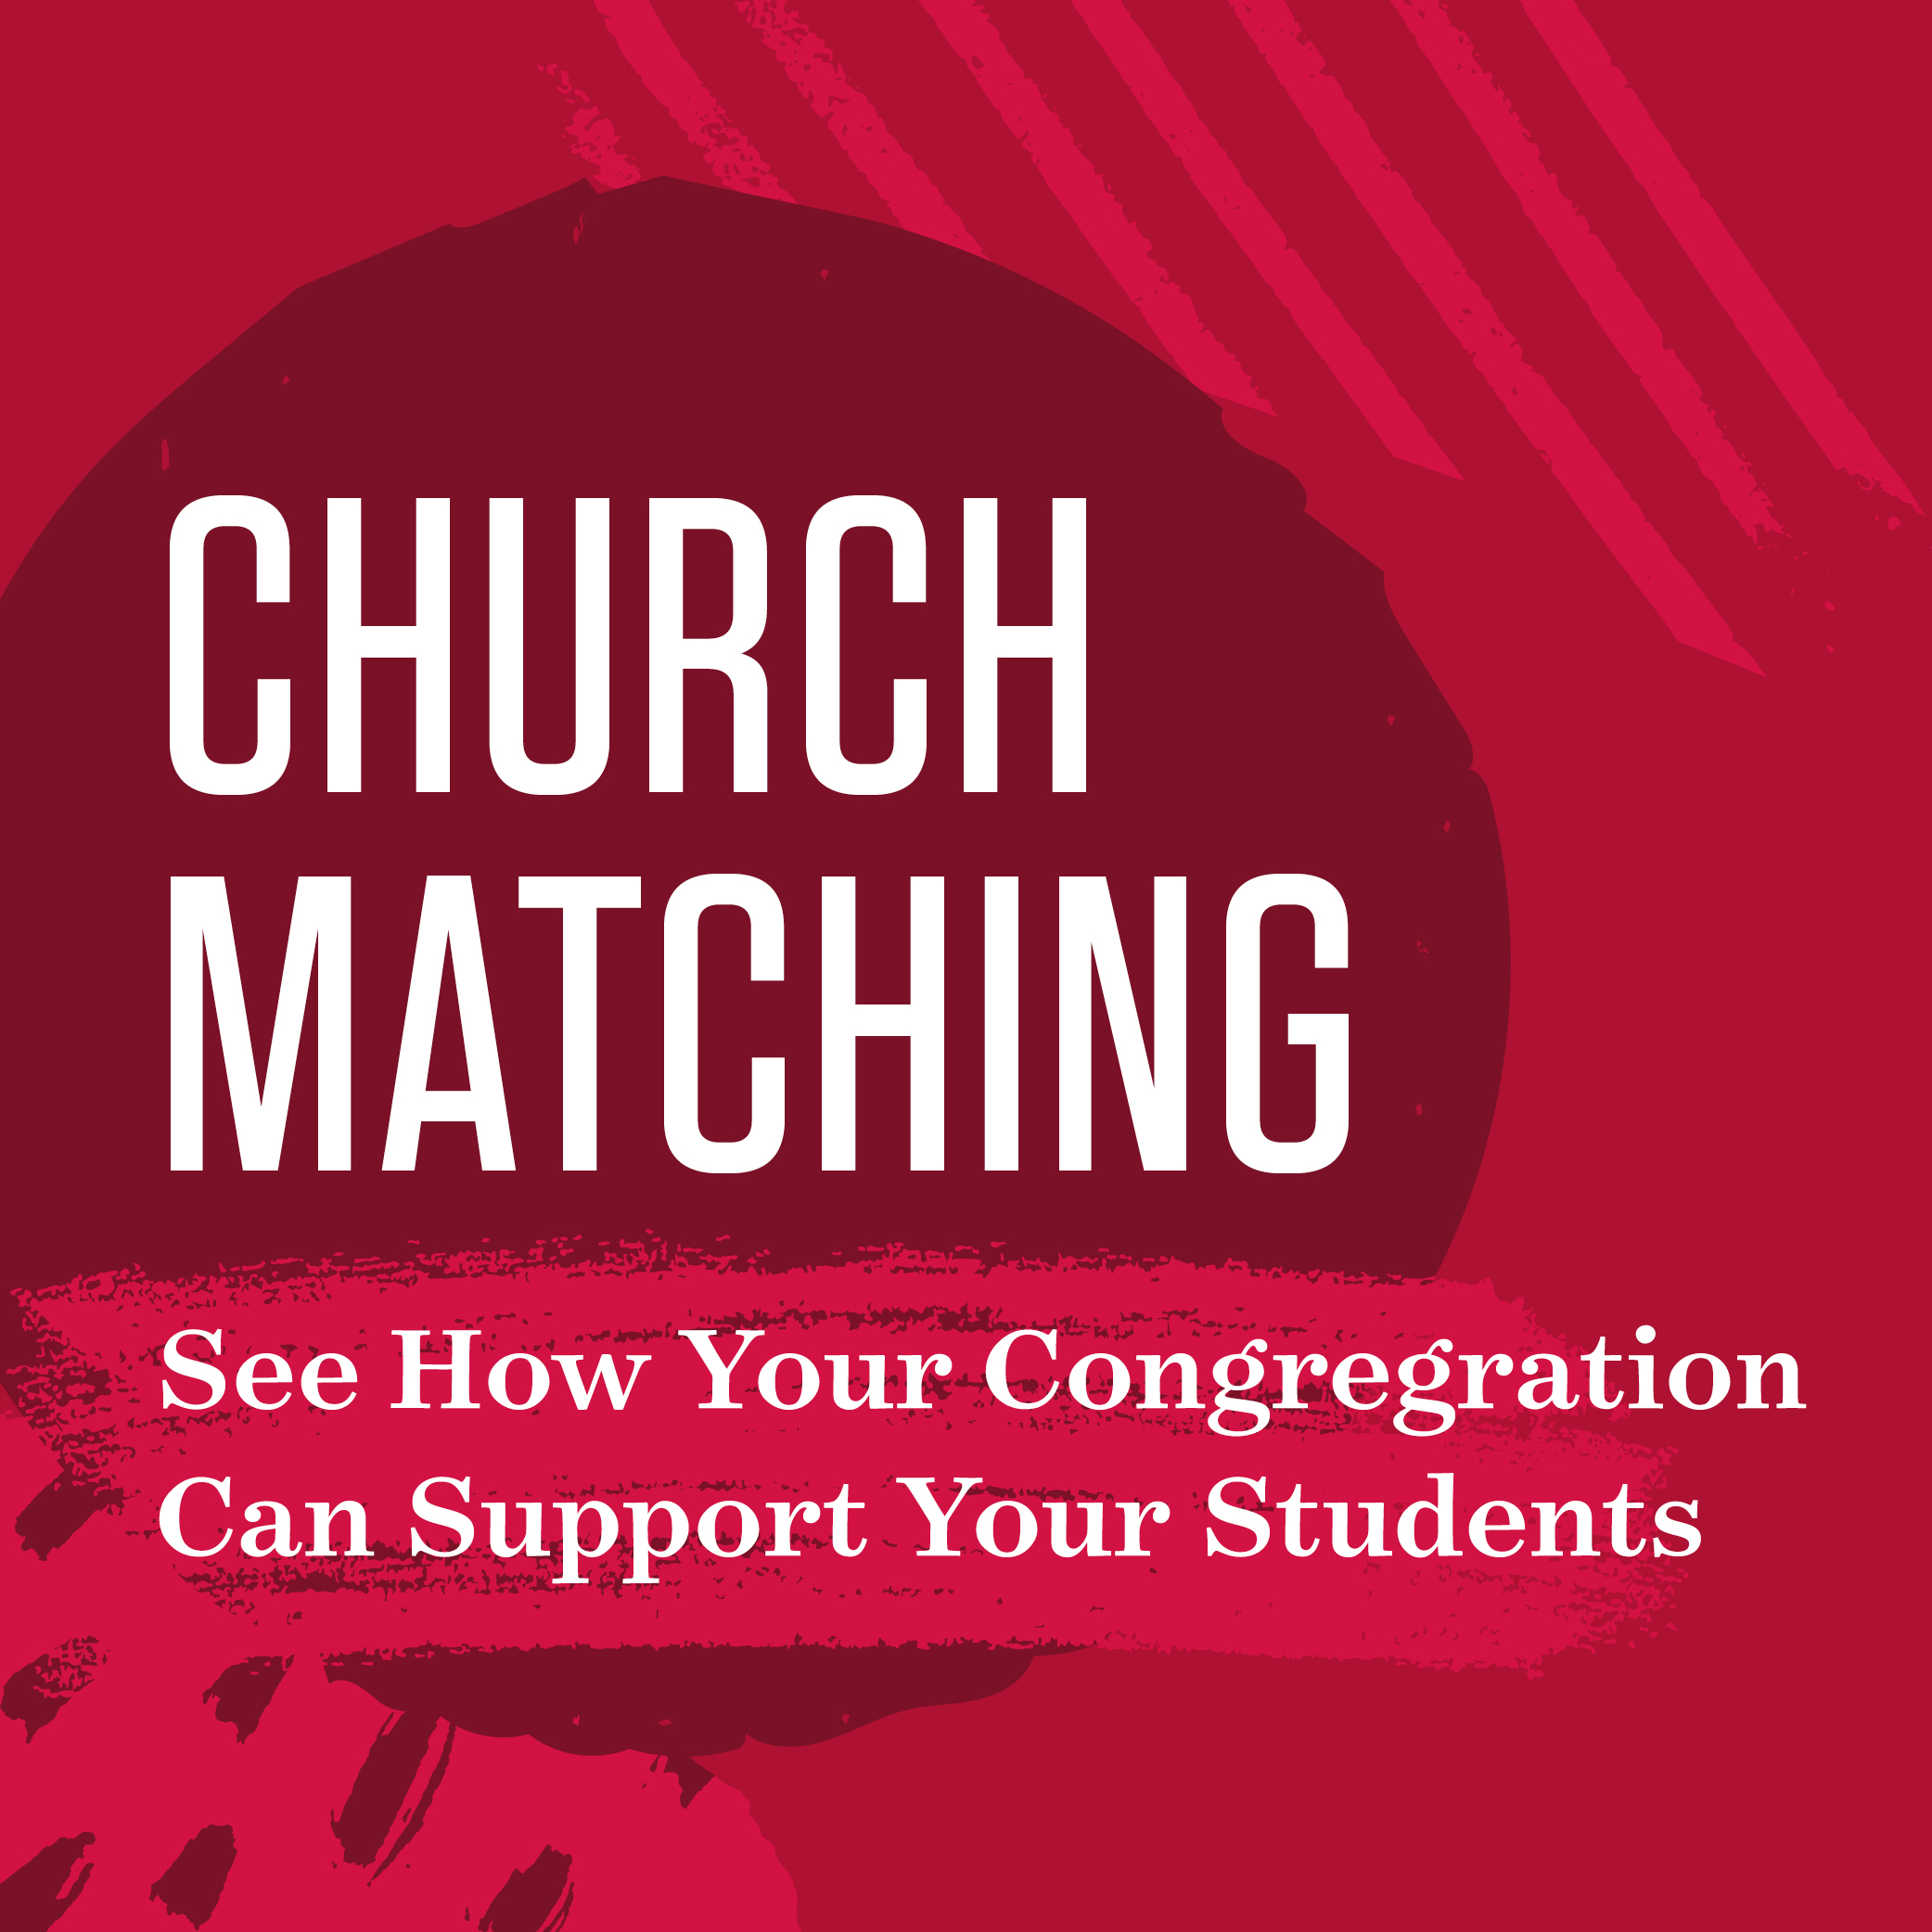 Church Matching: See how your congregation can support students